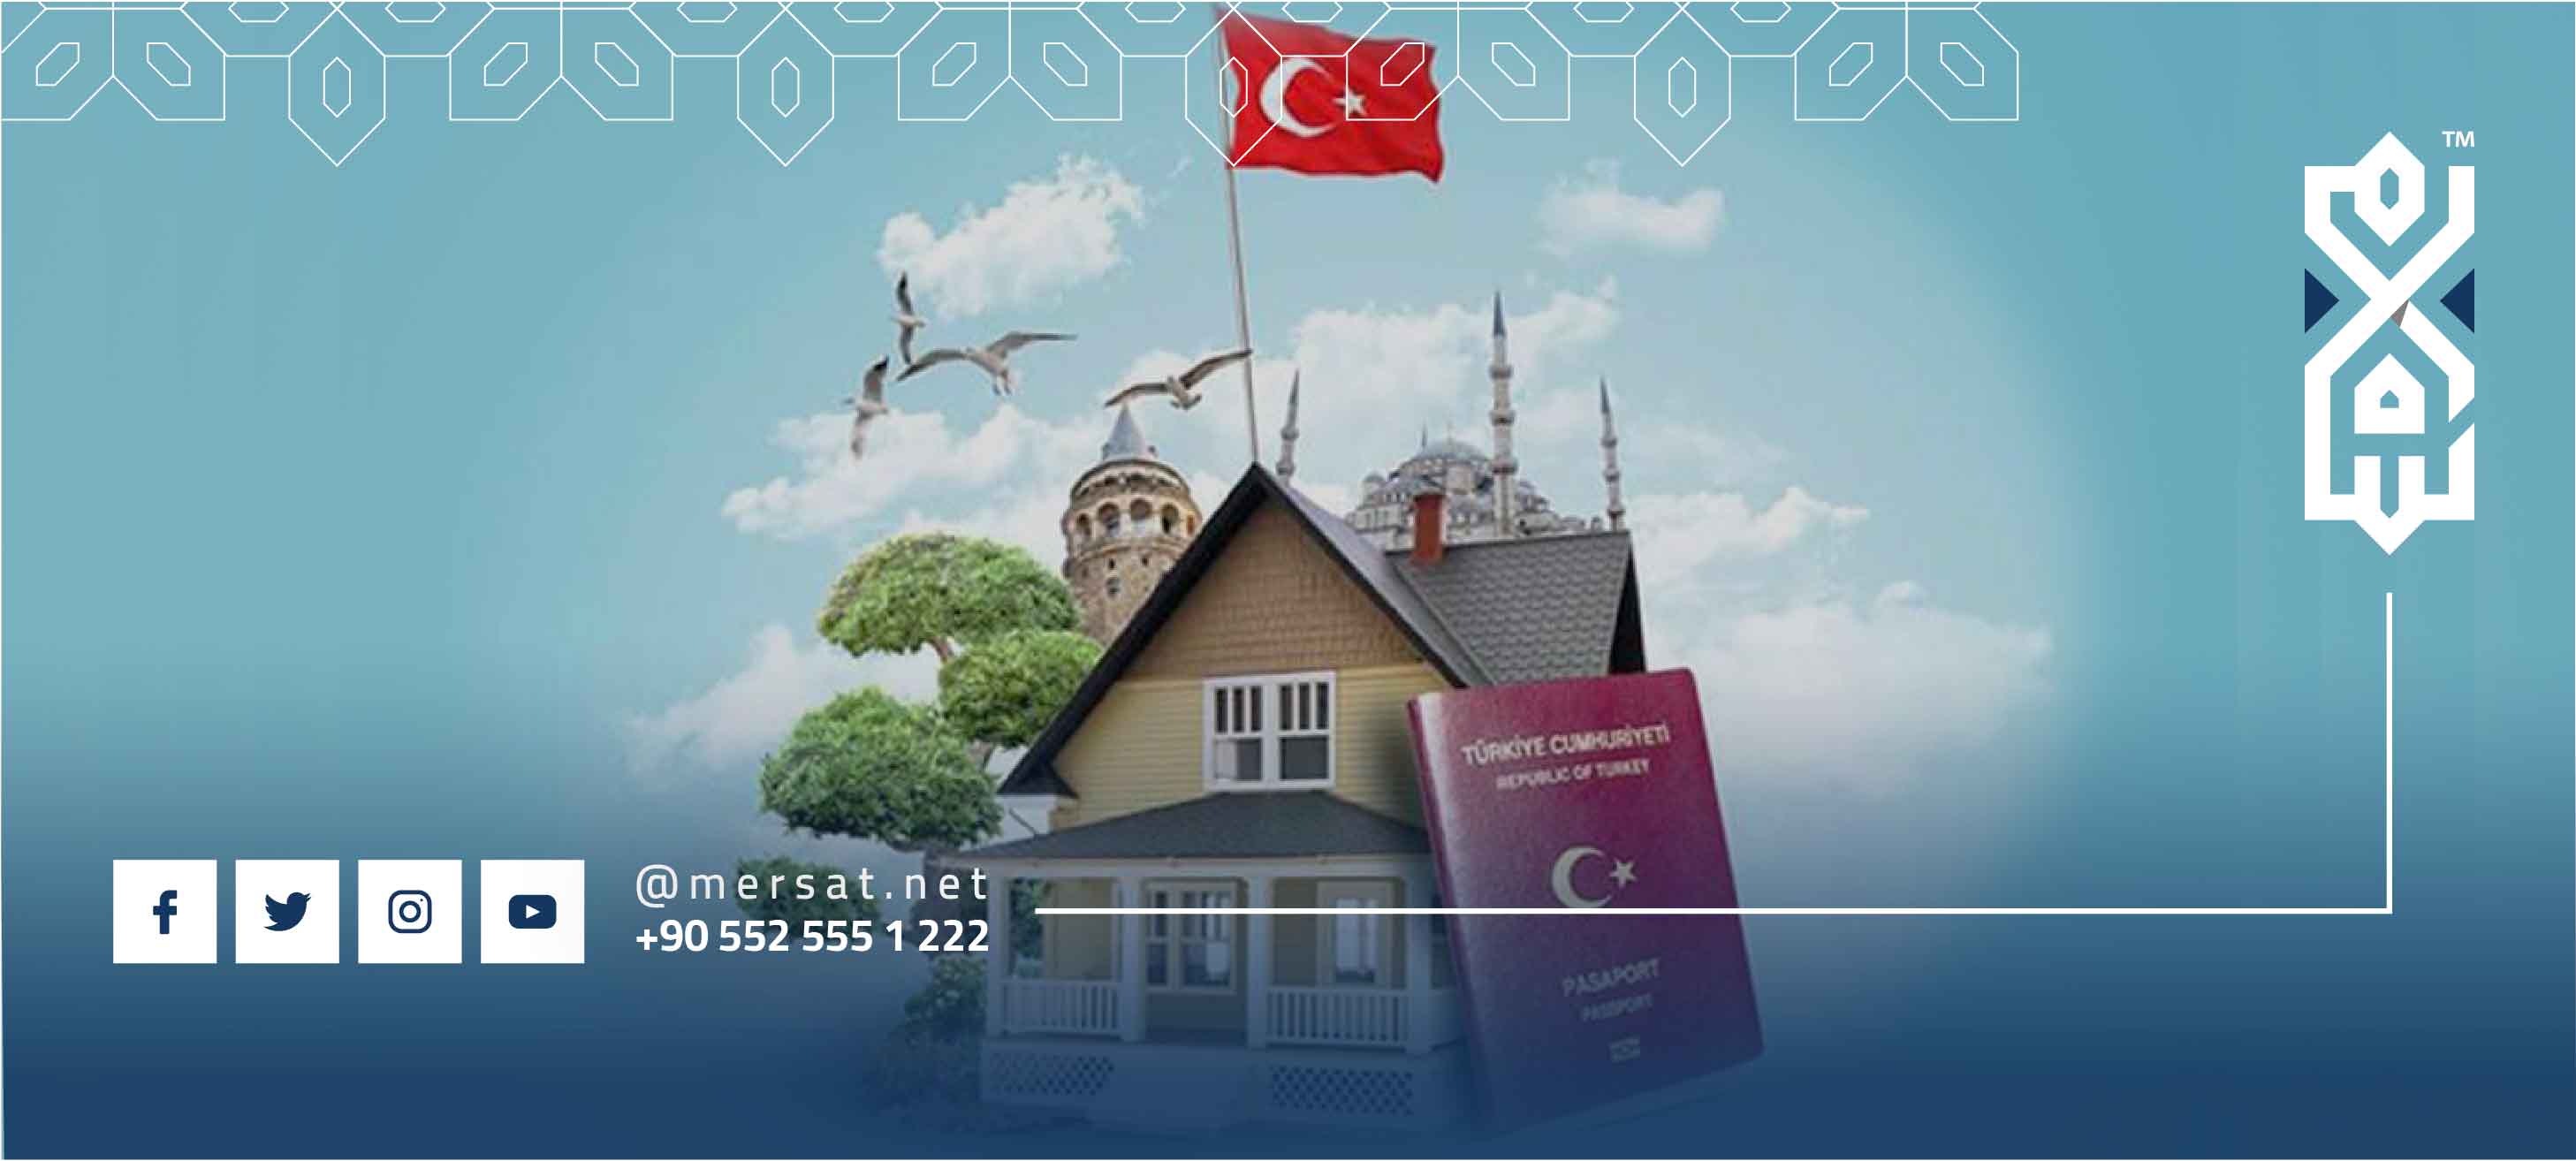 conditions for obtaining Turkish citizenship through real estate investment